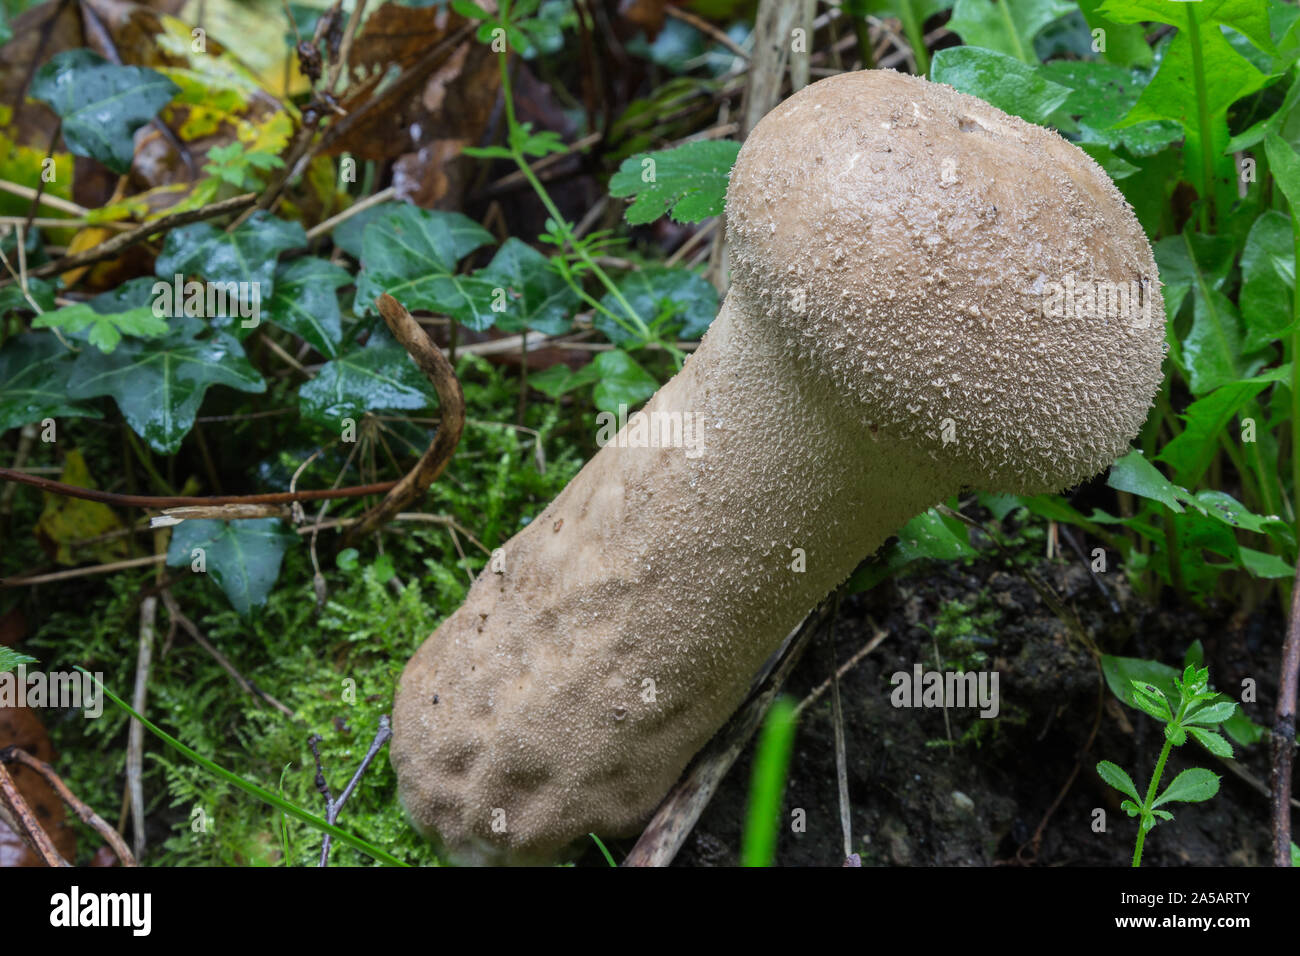 Slate Bolete or Leccinum duriusculum, is a genus of fungi in the family Boletaceae. It was the name given first to a series of fungi within the genus Stock Photo